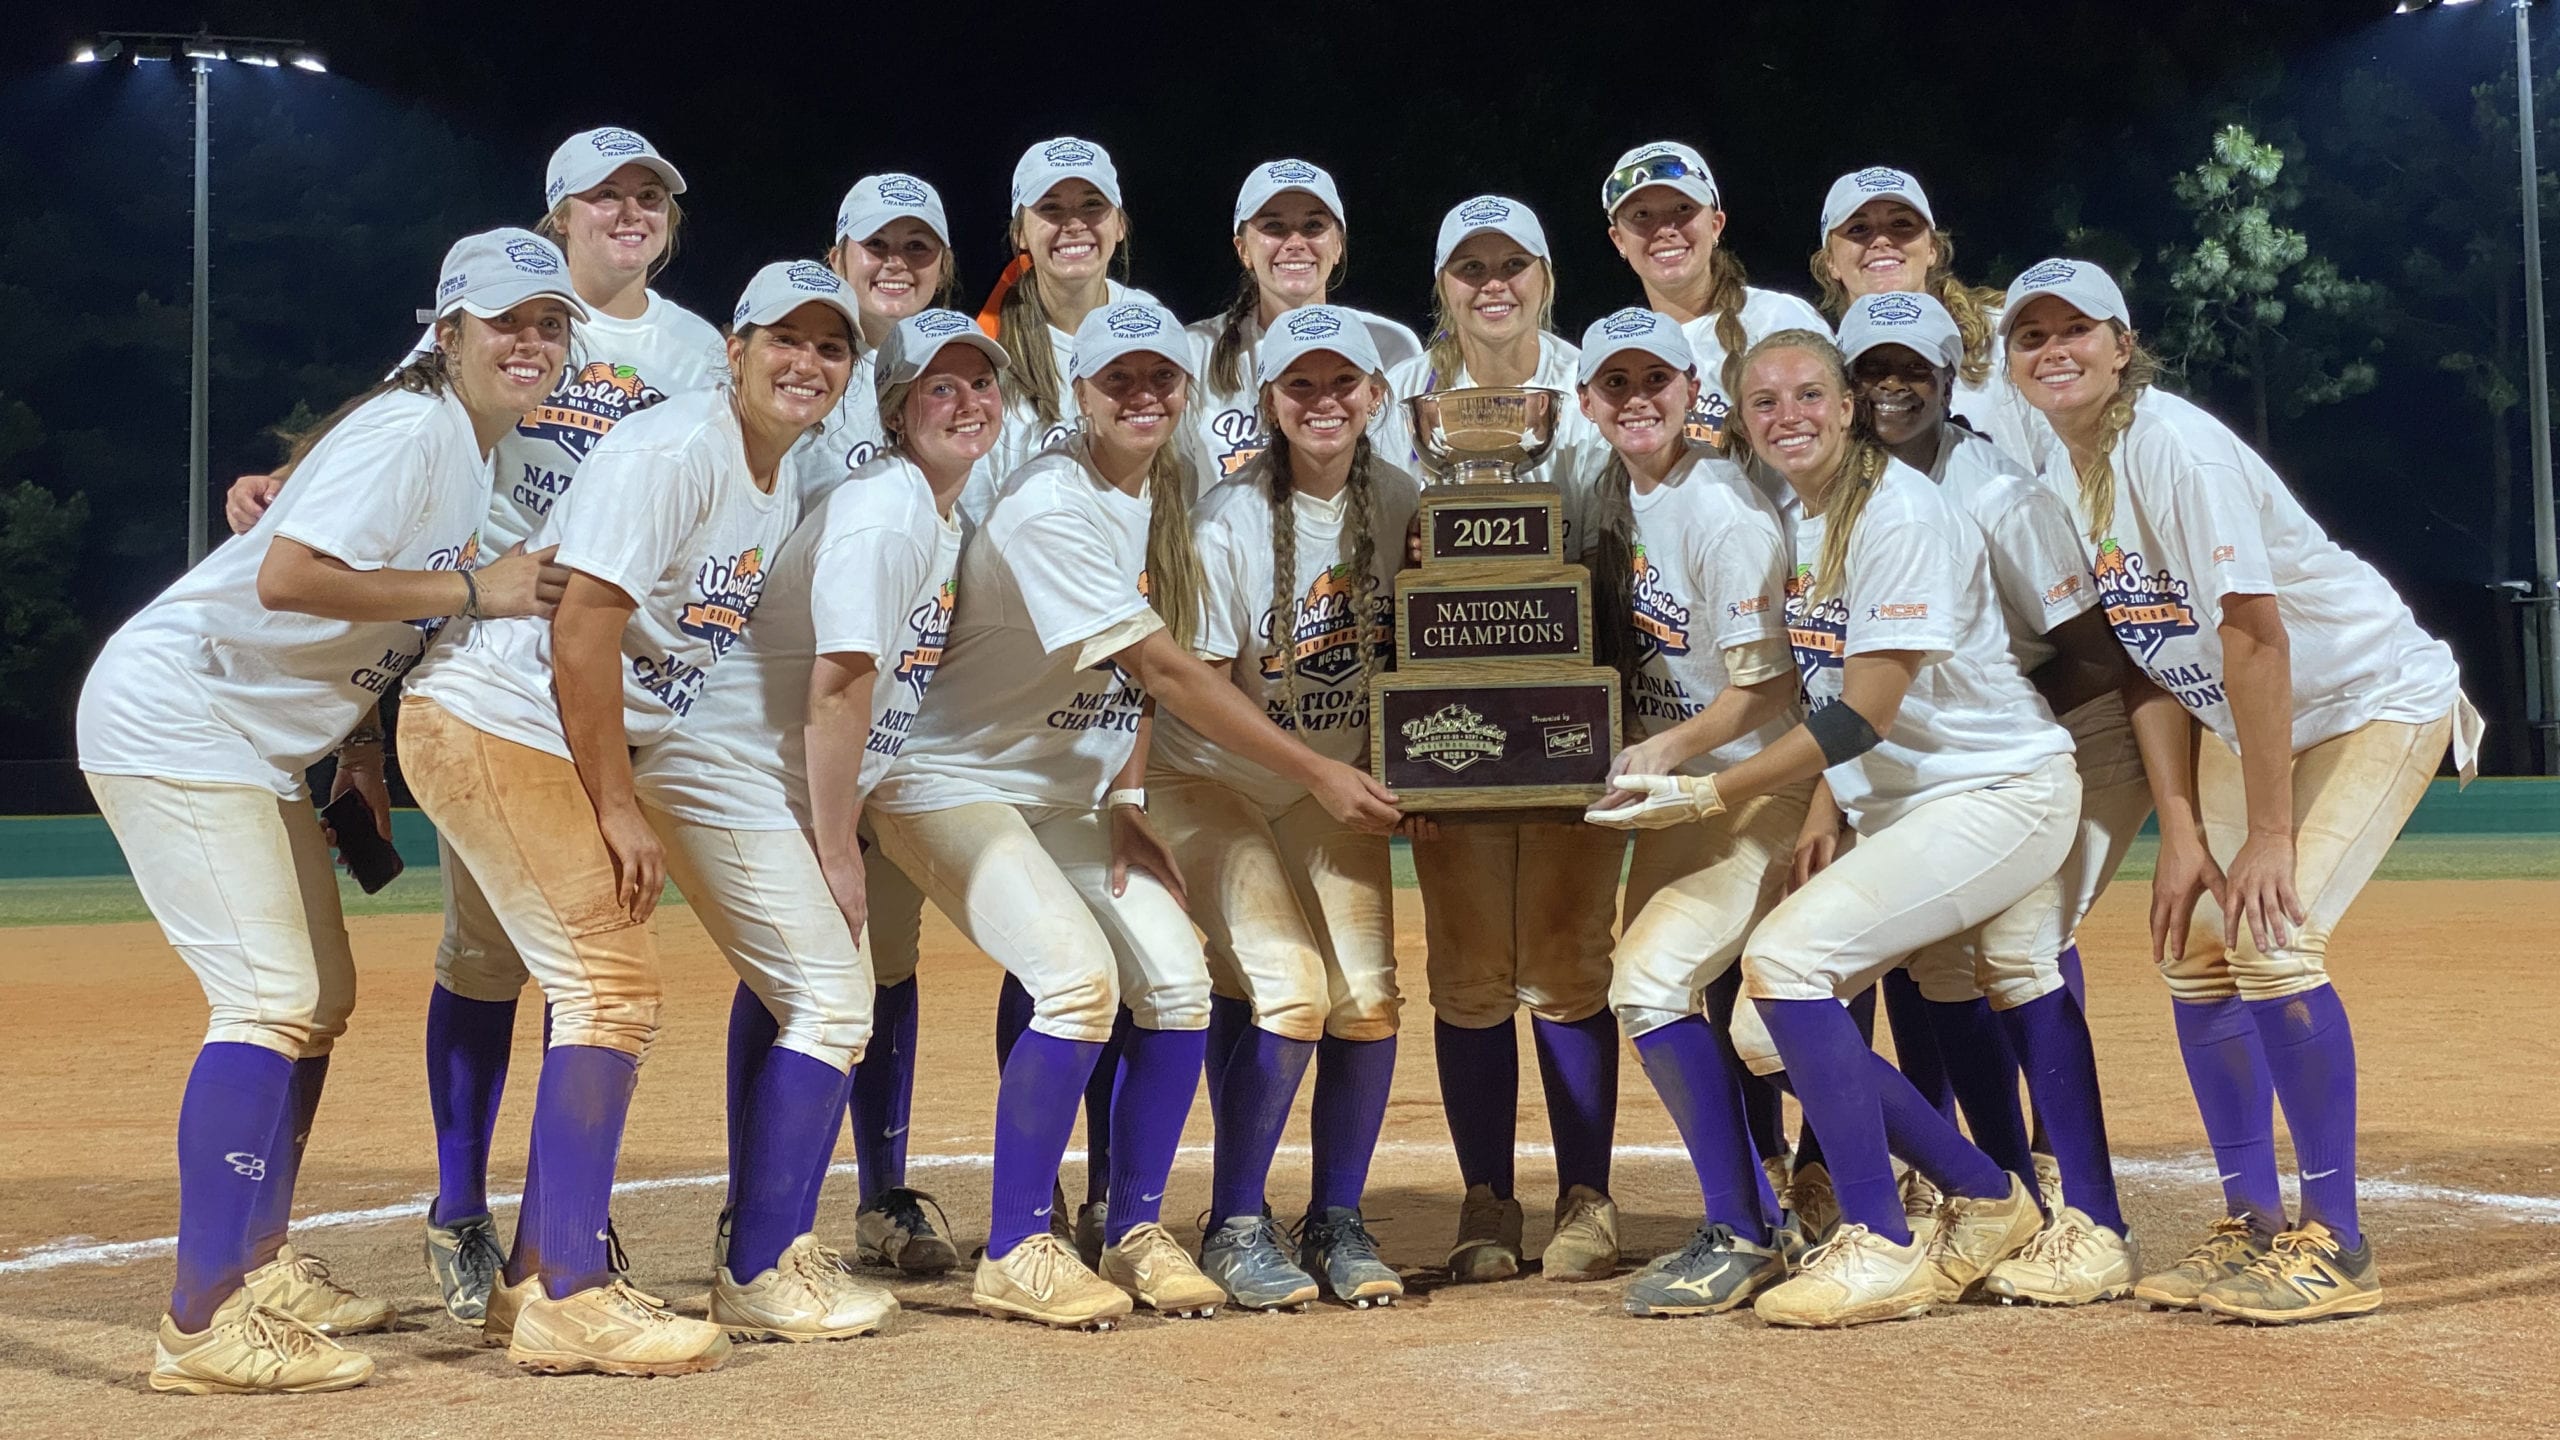 Clemson Club Softball celebrates its first national championship on May 23, 2021 in Columbus, Georgia